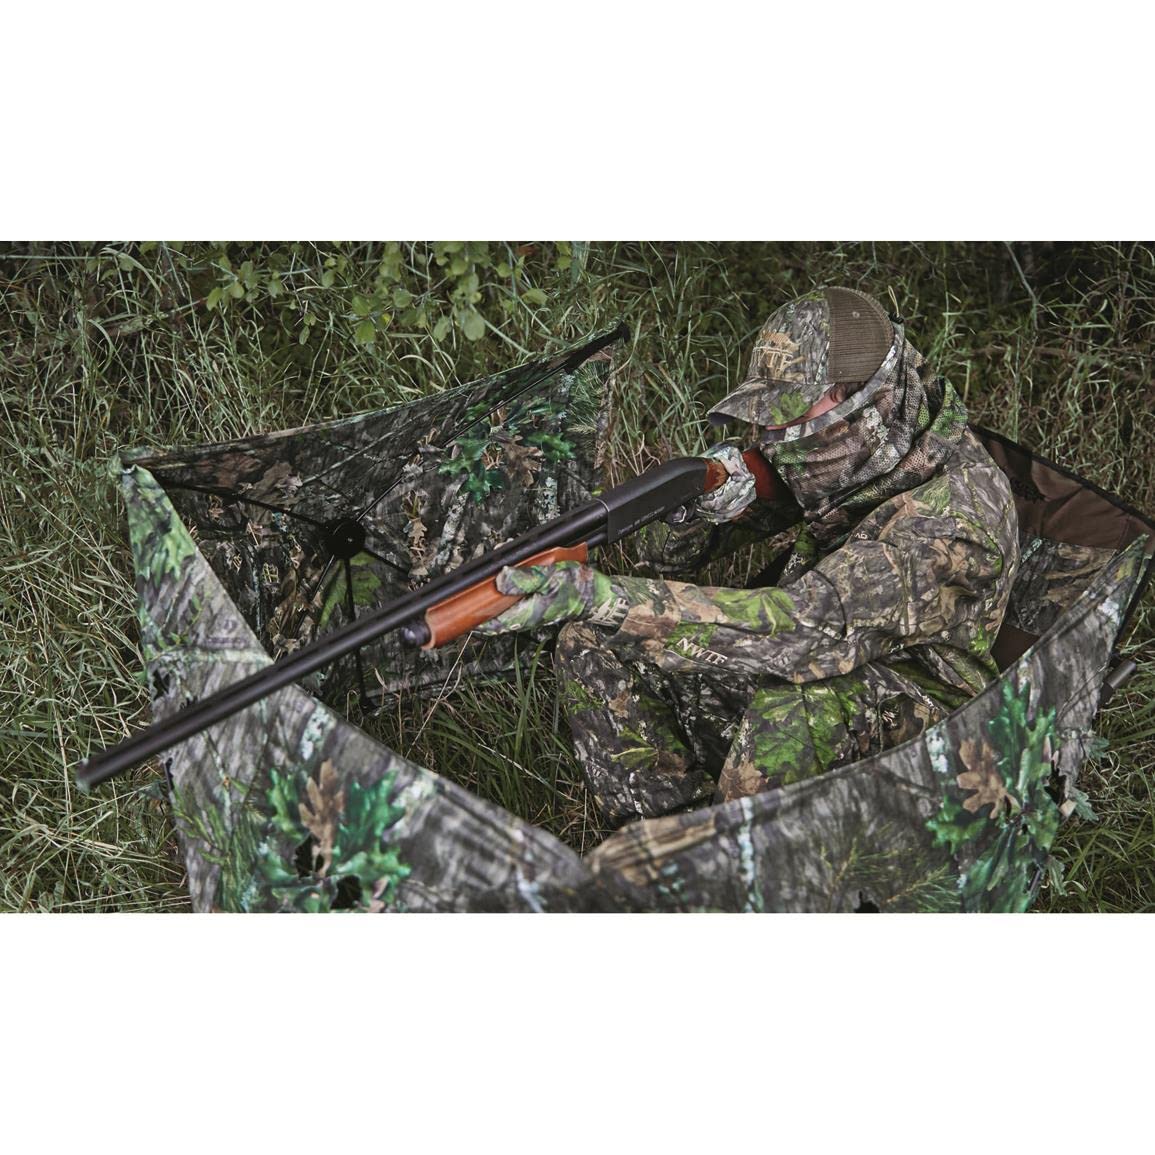 Guide Gear Magnum Turkey Hunting Chair Lightweight Folding Hunt Seat Portable Packable Hunting Gear Equipment.